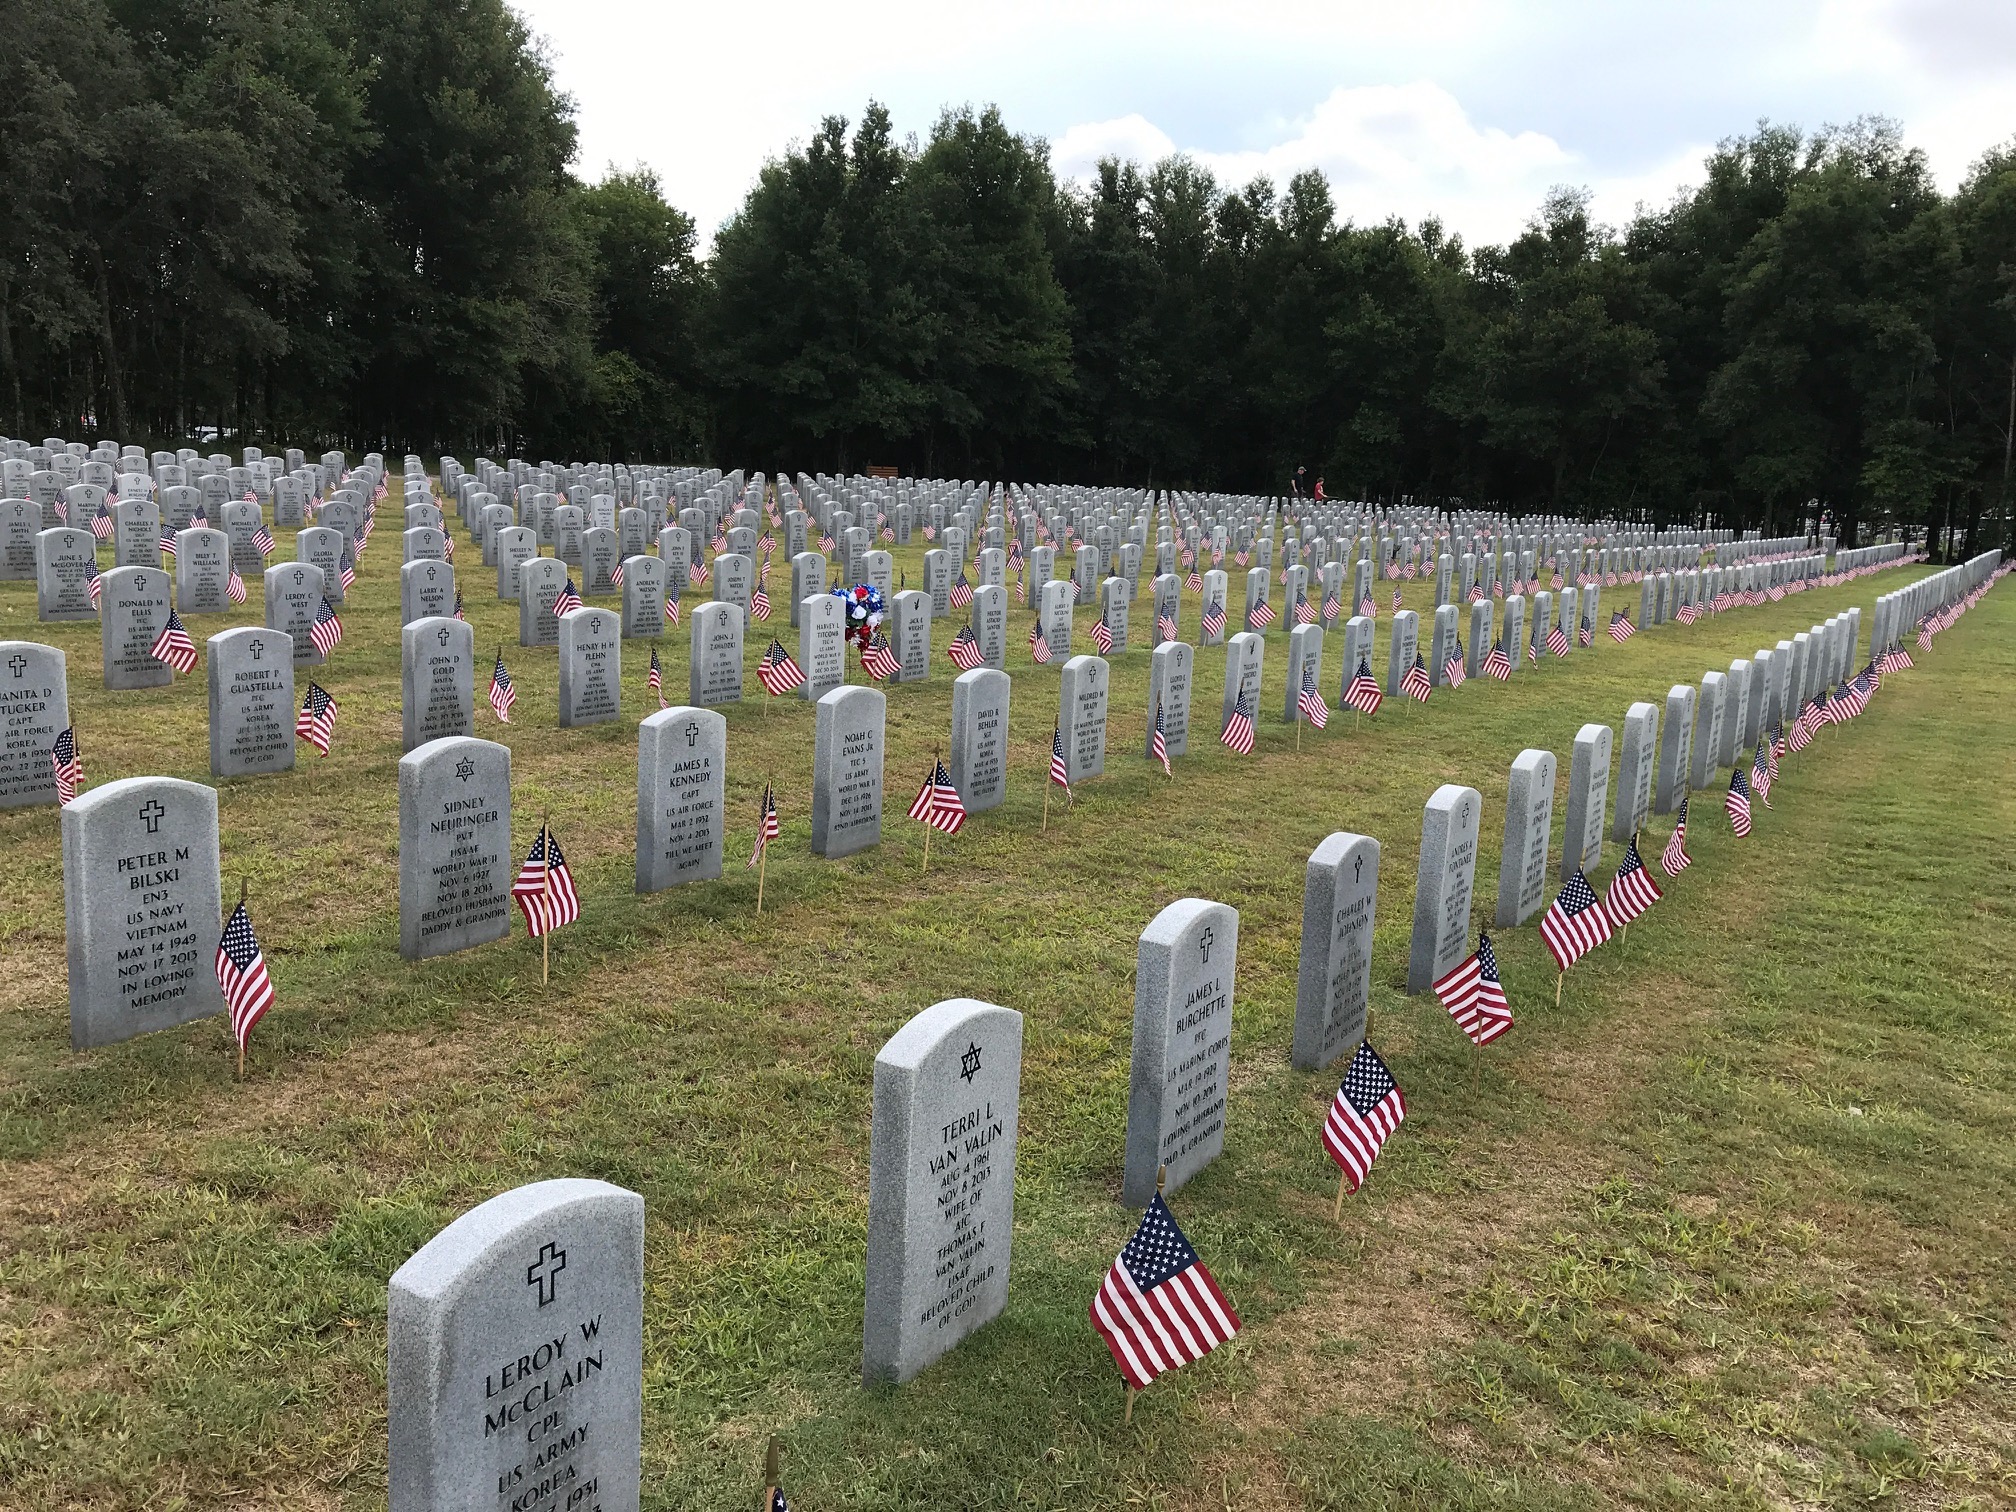 Group from The Villages places flags at veterans’ graves in Bushnell